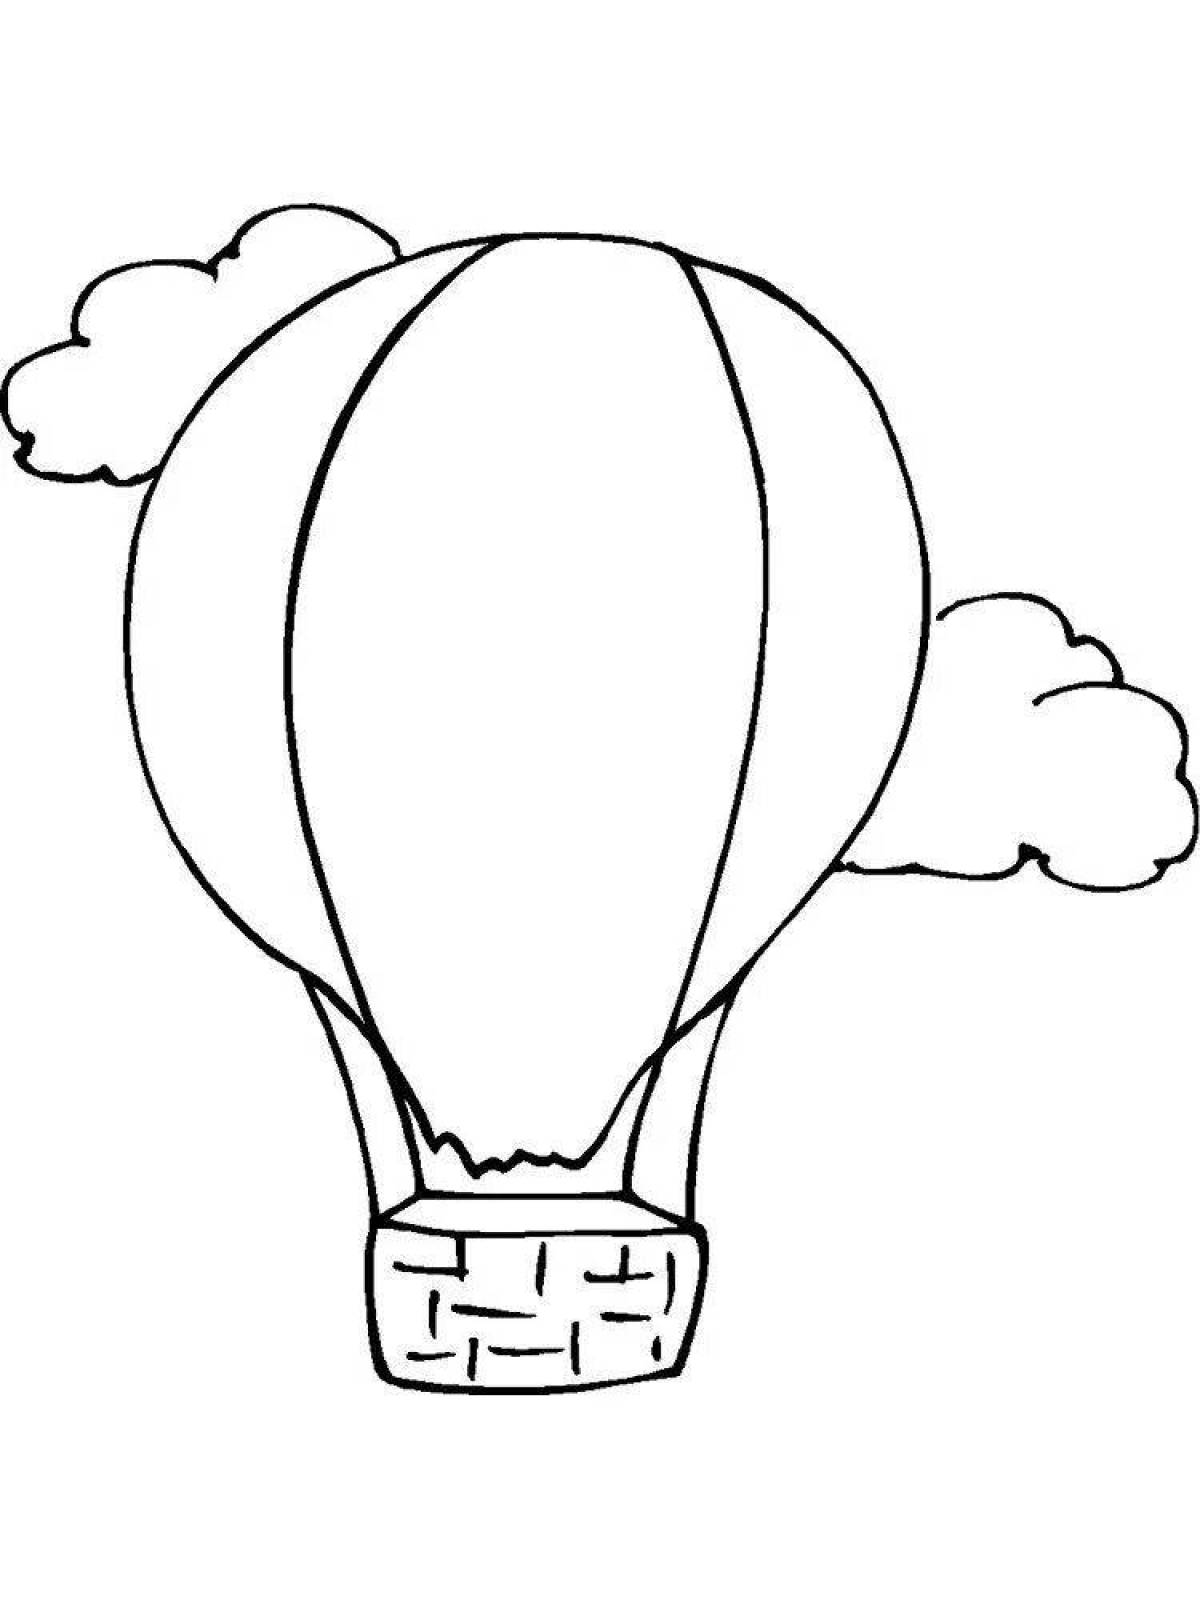 Coloring book luminous balloon with a basket for children